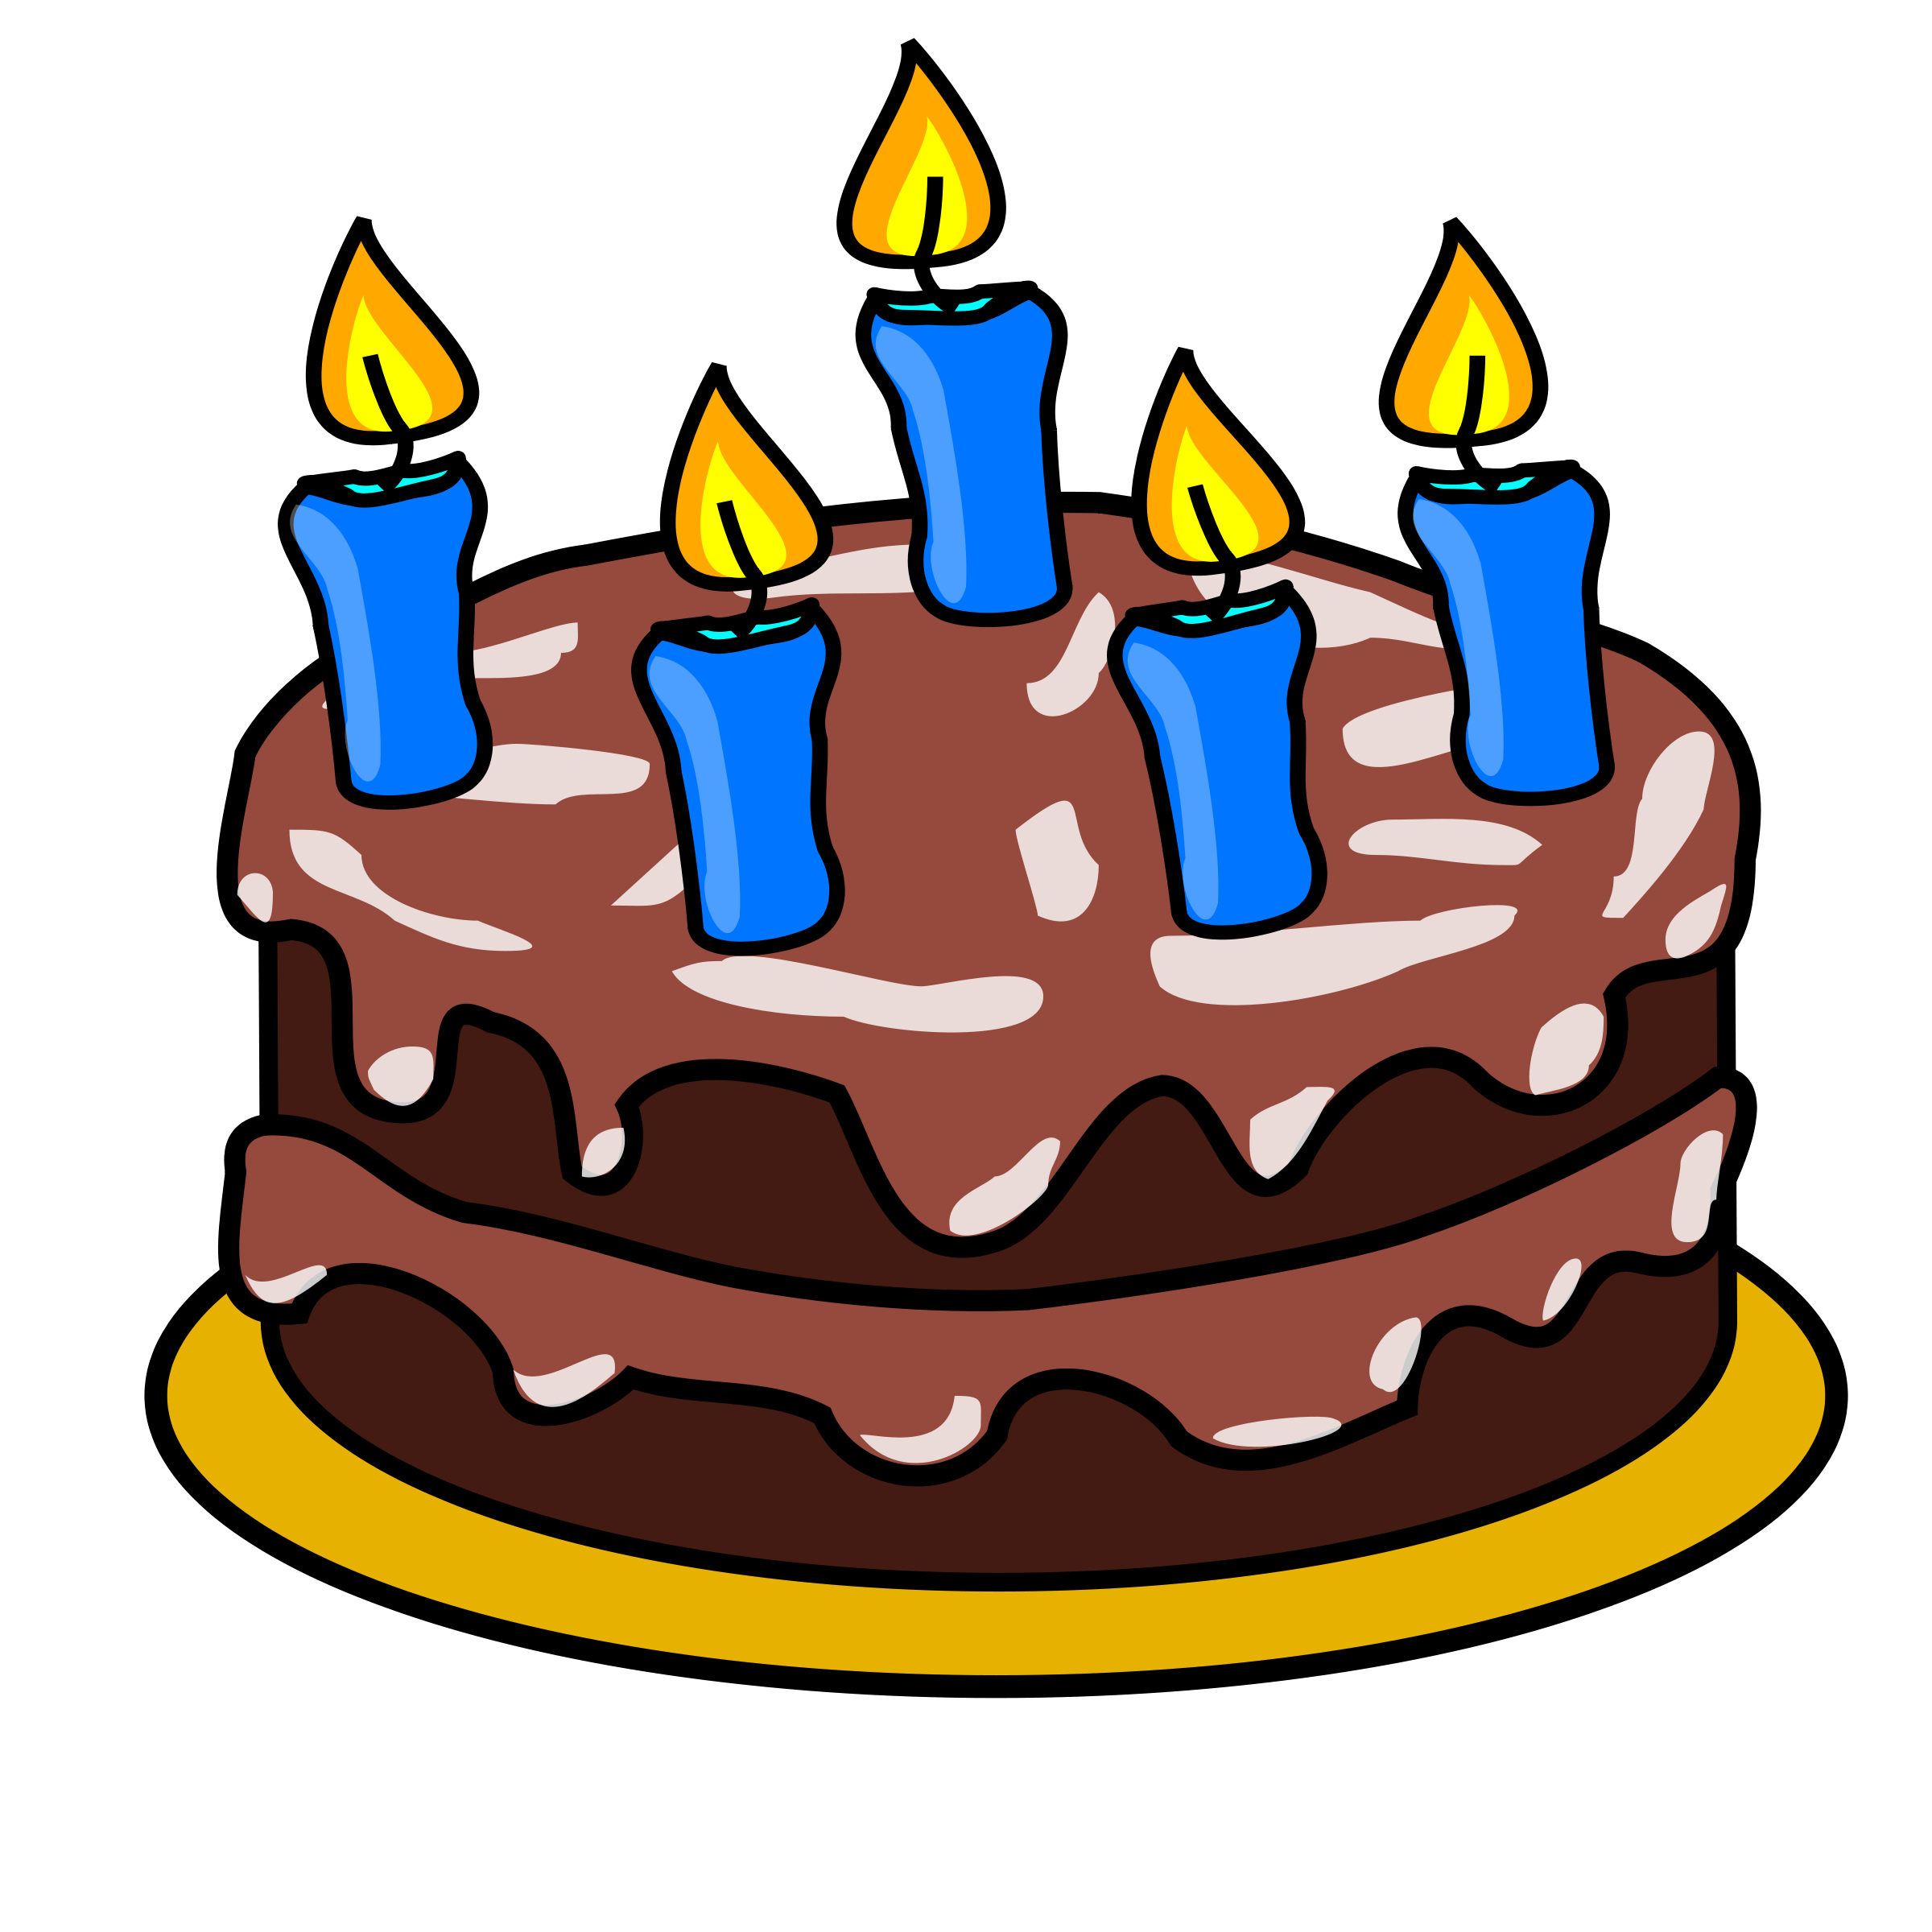 happy birthday cake png download - 1024*1024 - Free Transparent Birthday  Cake png Download. - CleanPNG / KissPNG